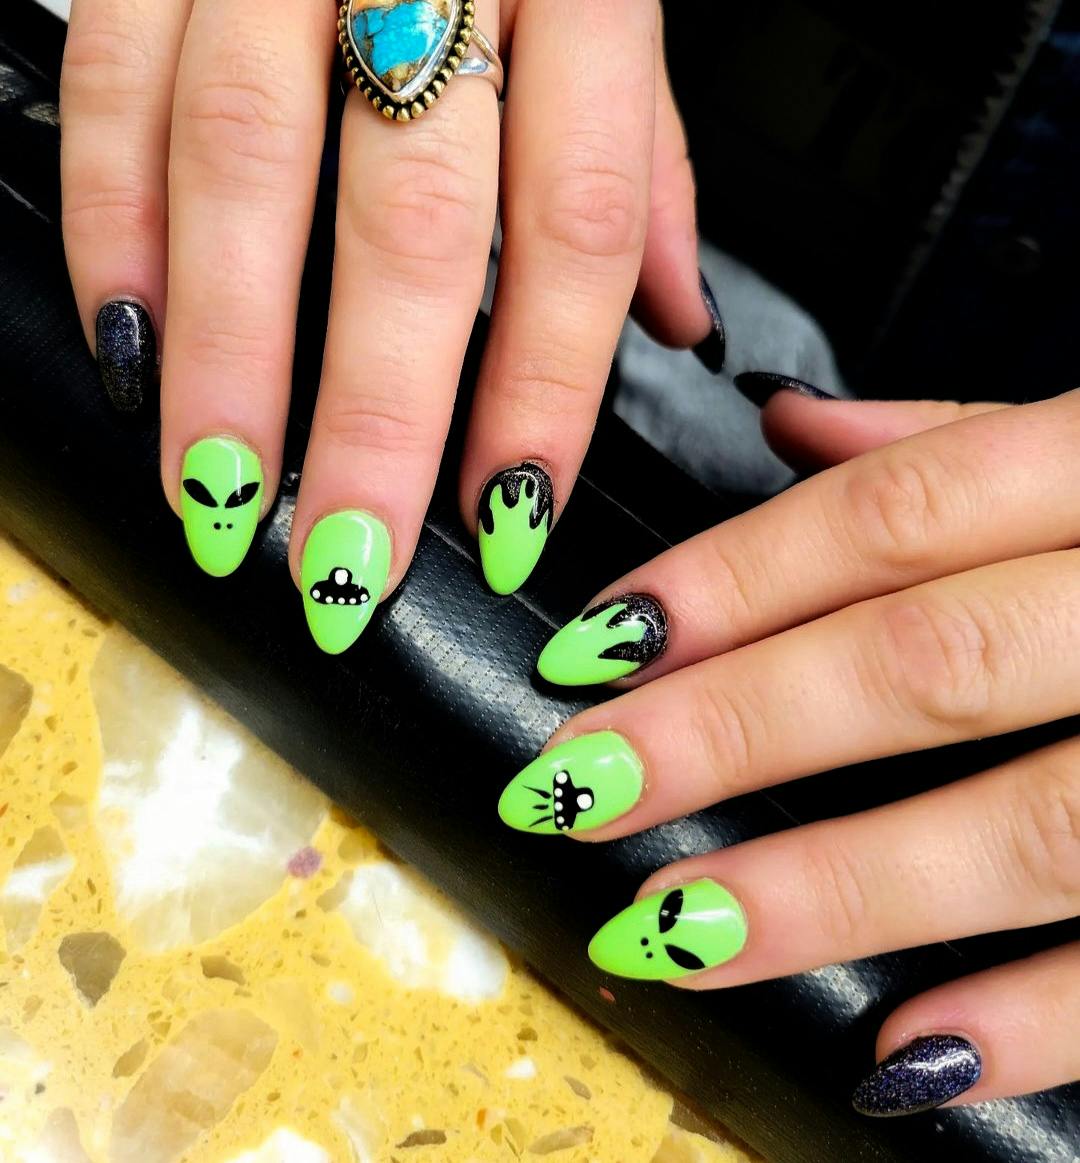 Hands on table painted wih bright green aliens